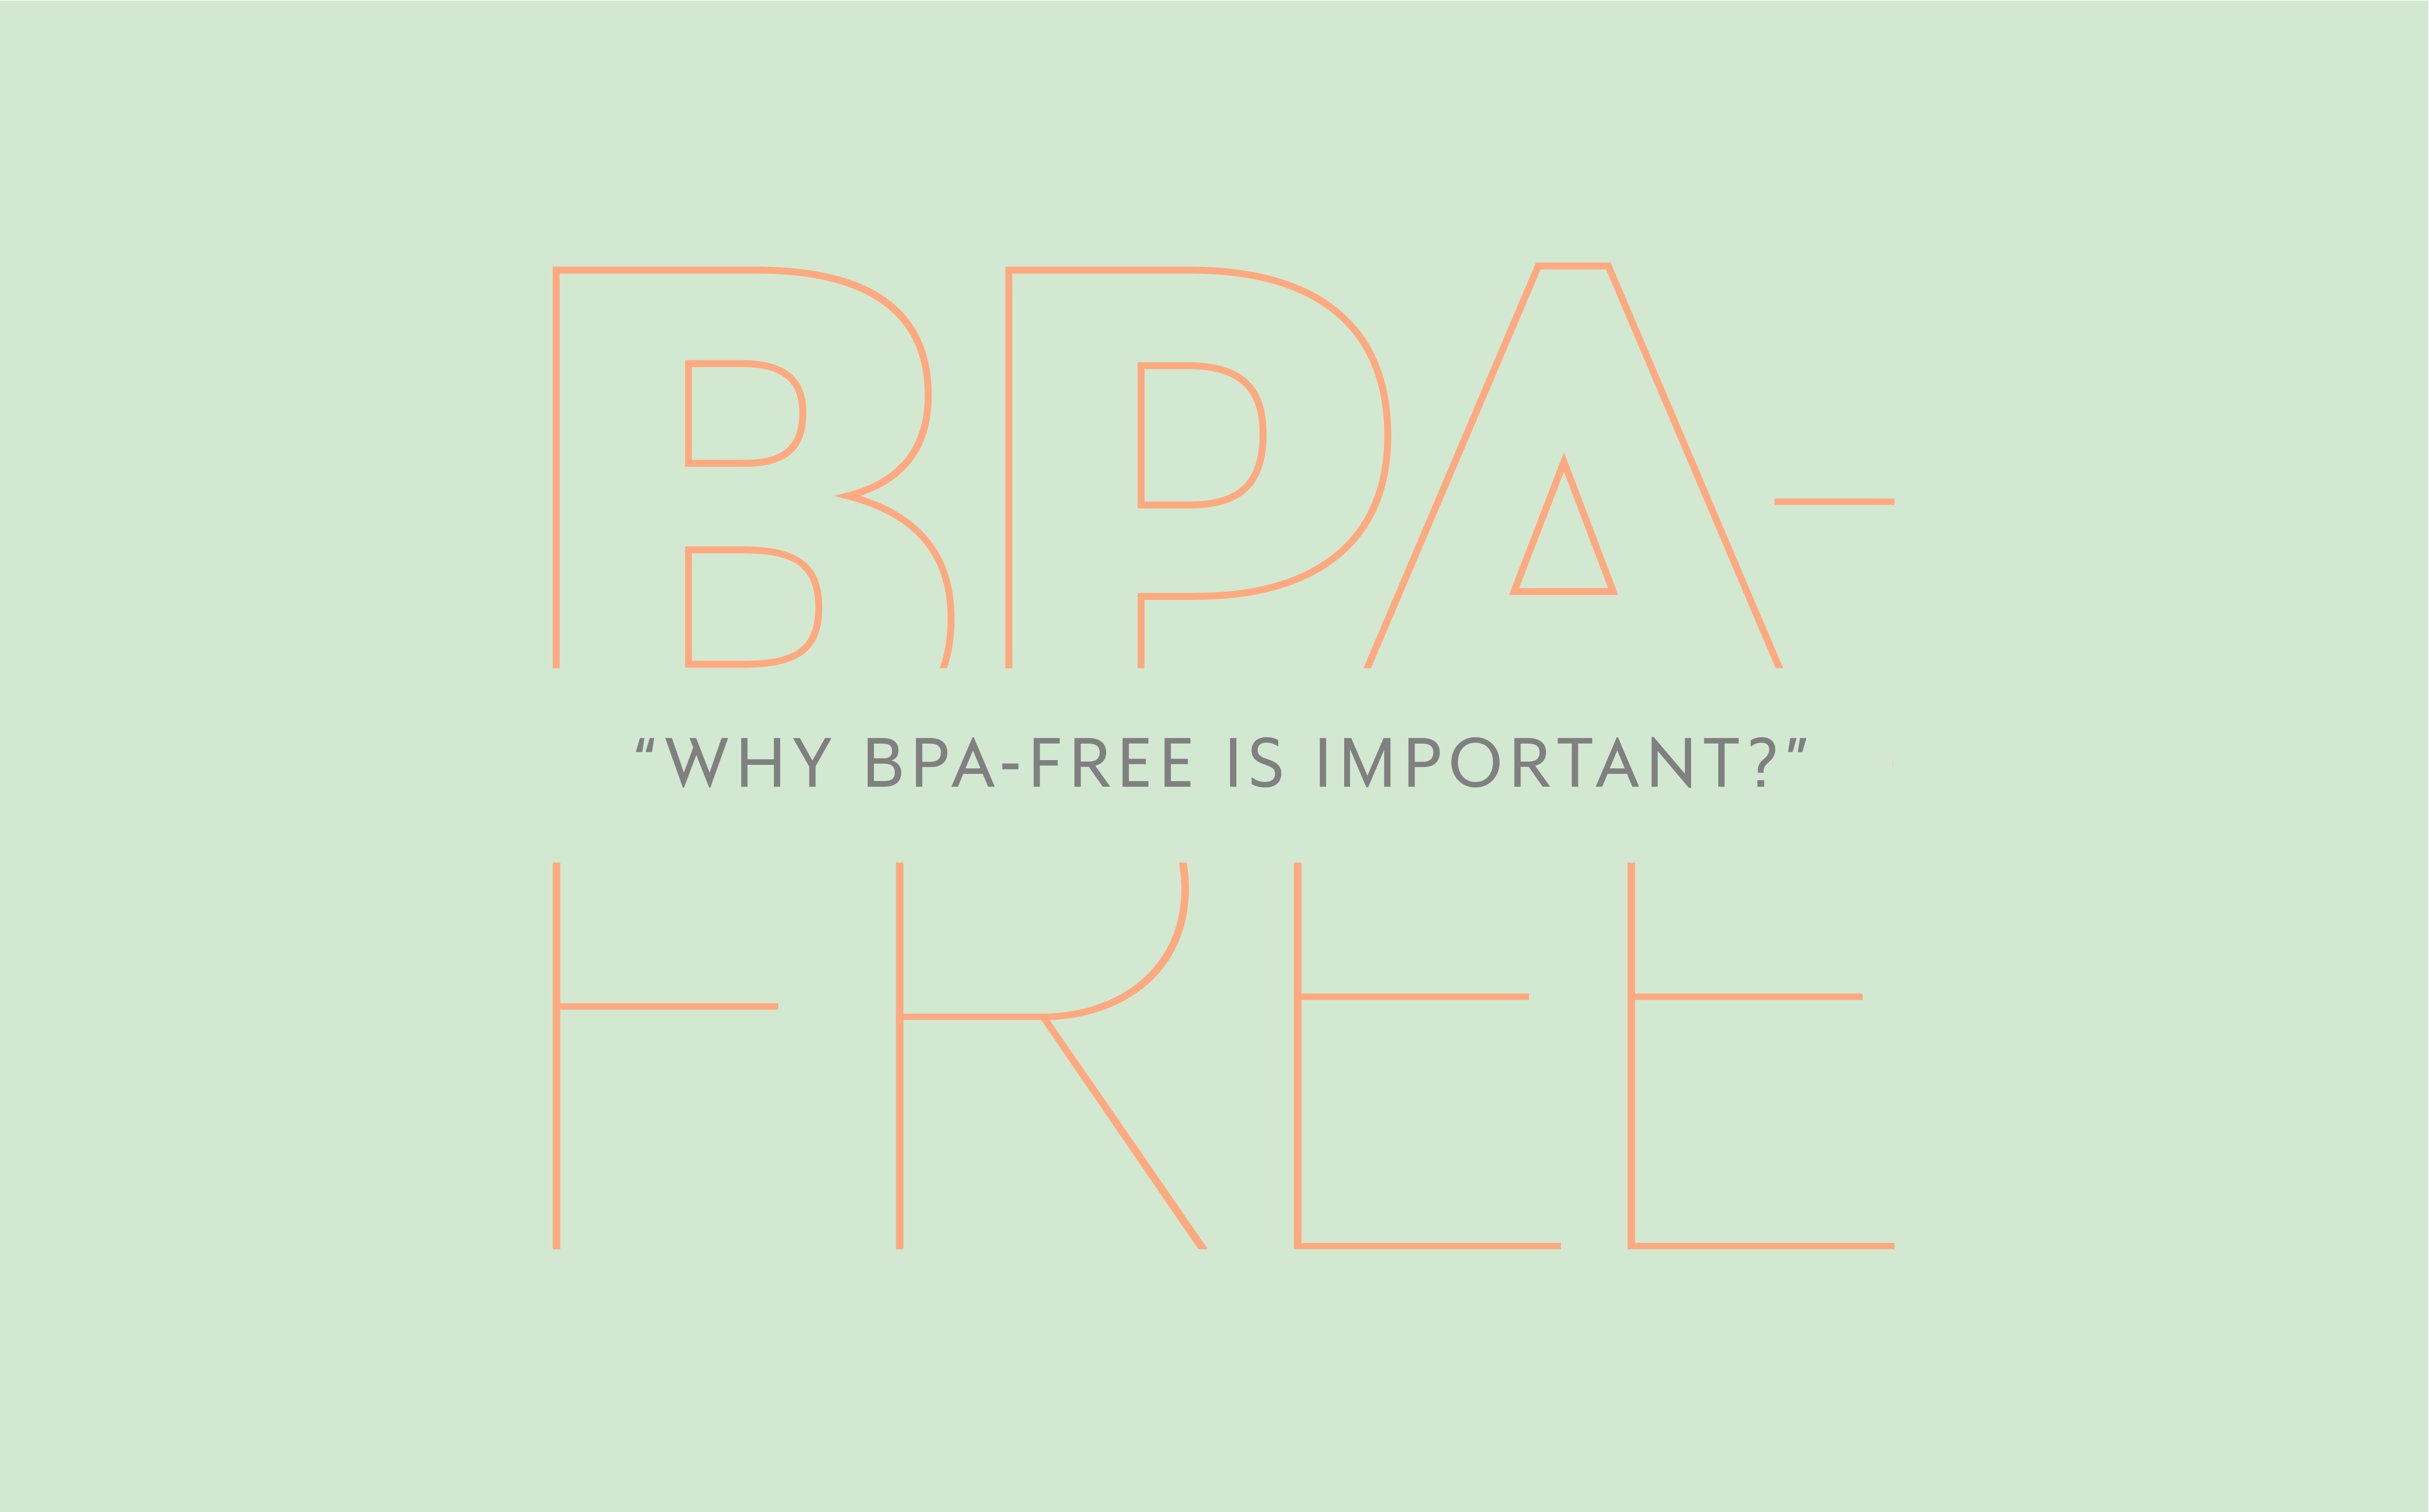 What is BPA and why BPA - BORRN benefits